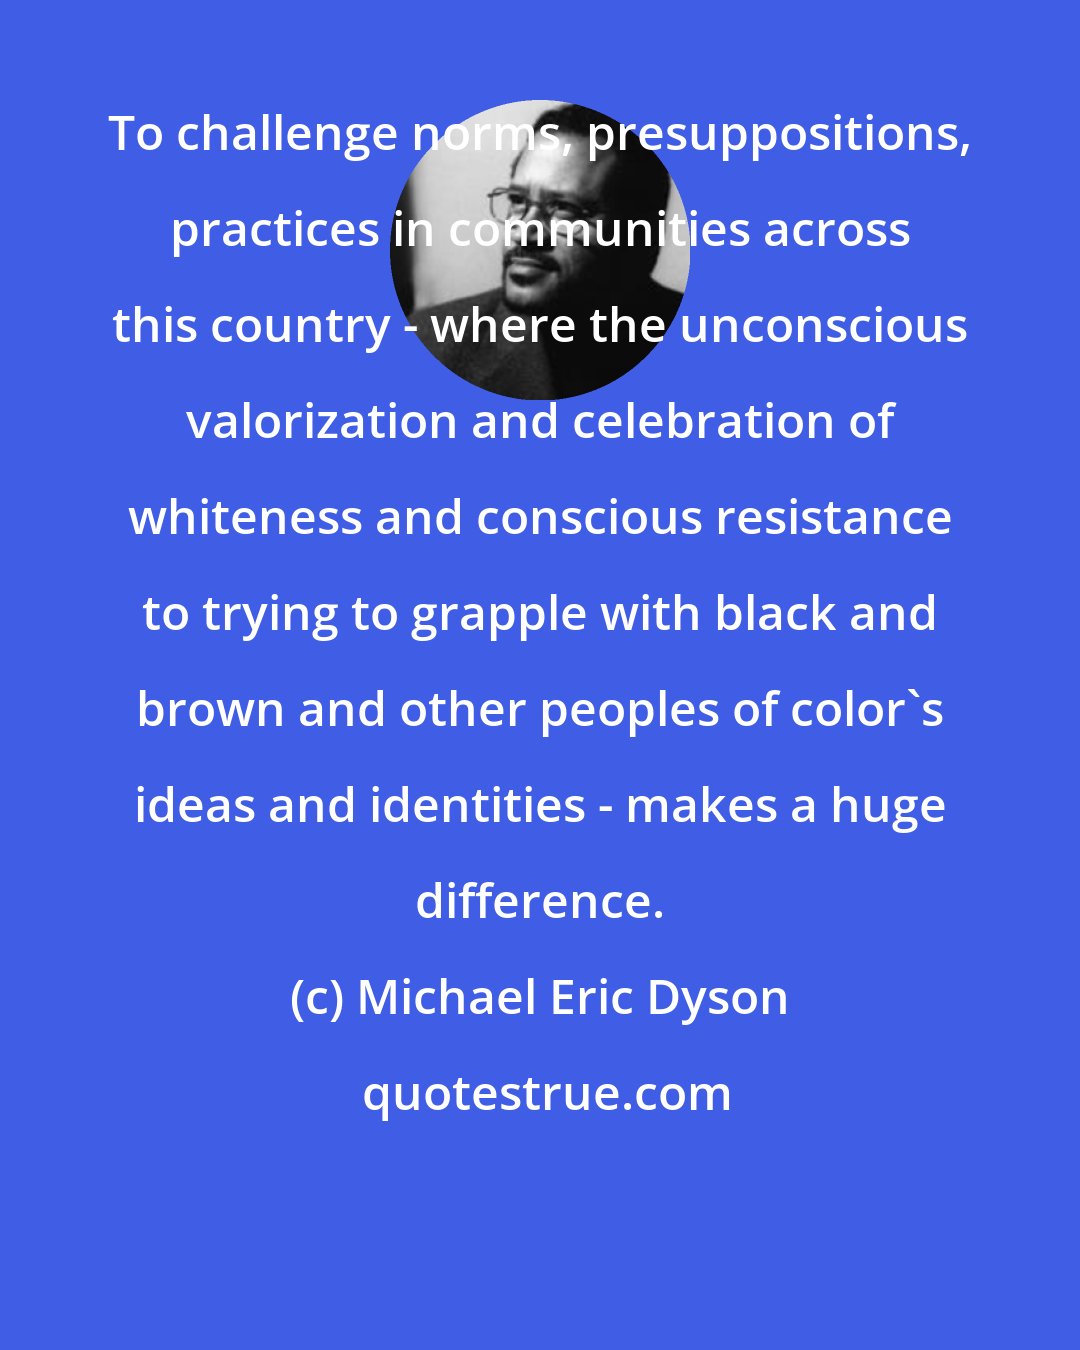 Michael Eric Dyson: To challenge norms, presuppositions, practices in communities across this country - where the unconscious valorization and celebration of whiteness and conscious resistance to trying to grapple with black and brown and other peoples of color's ideas and identities - makes a huge difference.